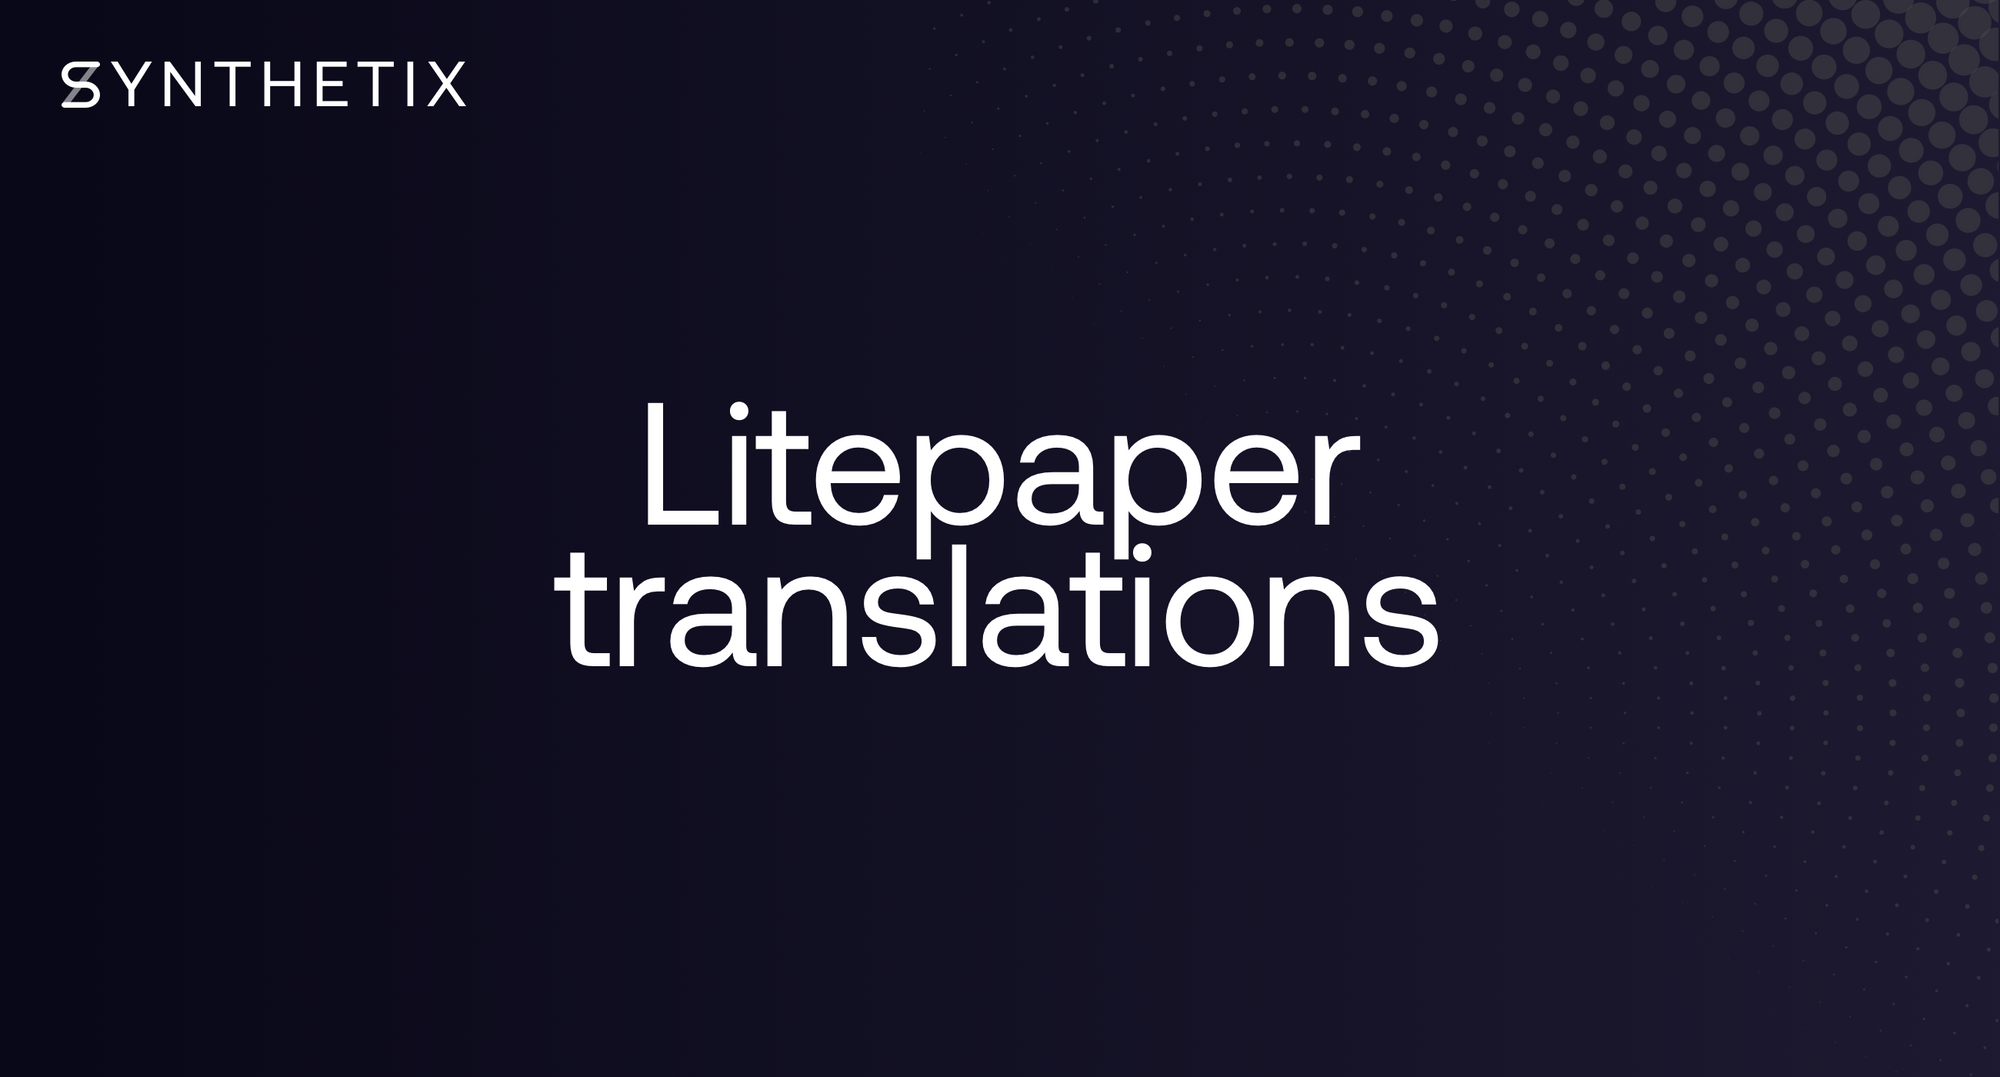 We're looking for community members to translate our litepaper!